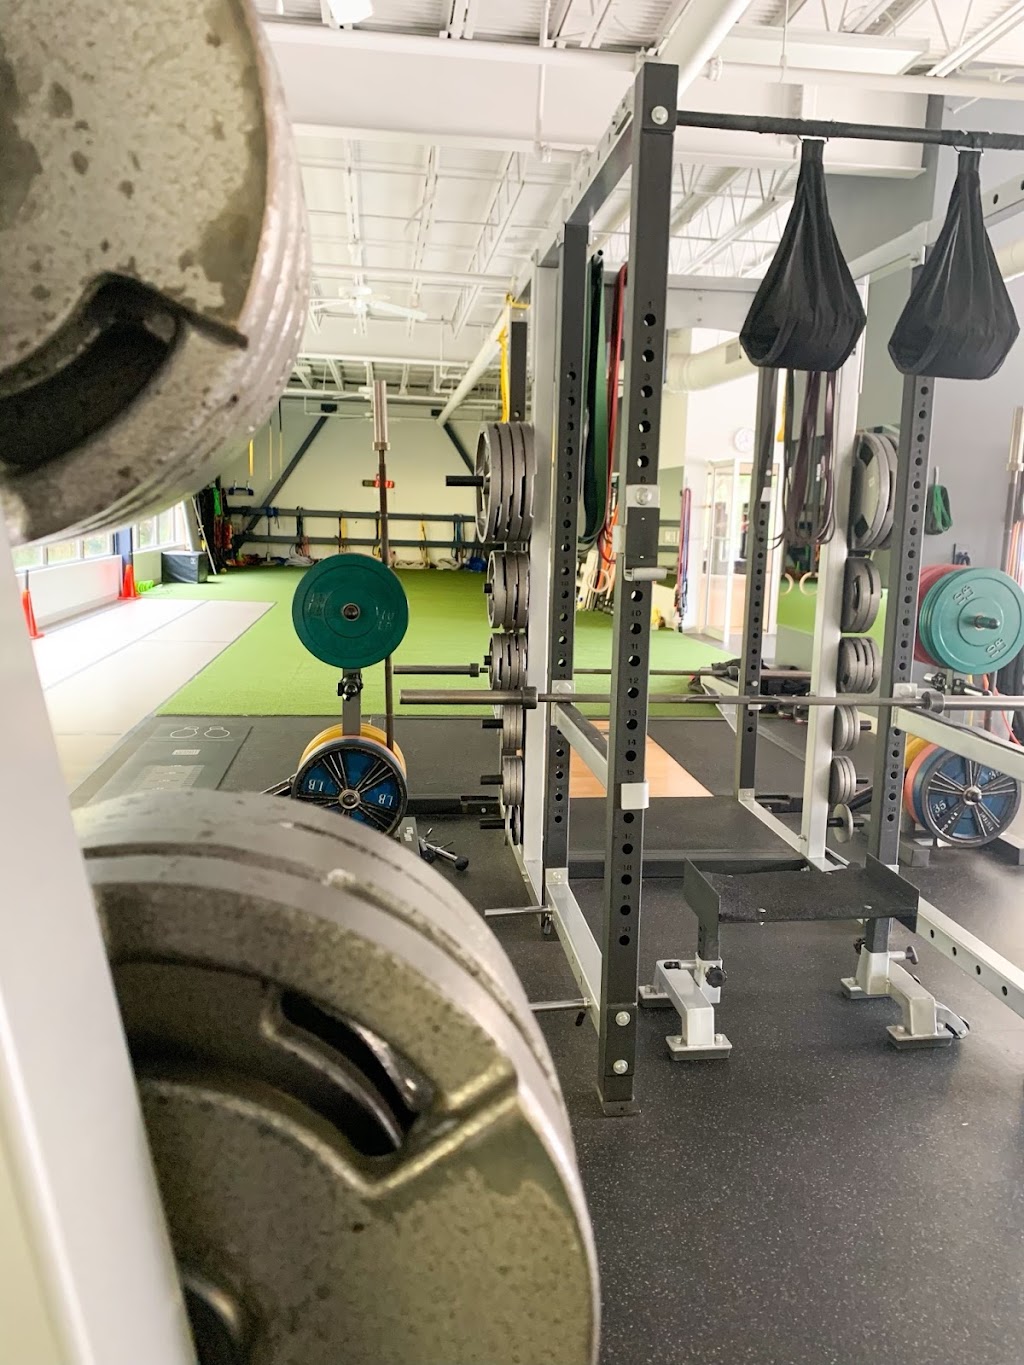 Drive Physical Therapy and Performance | 7840 Roswell Rd #475, Sandy Springs, GA 30350, USA | Phone: (404) 919-8126